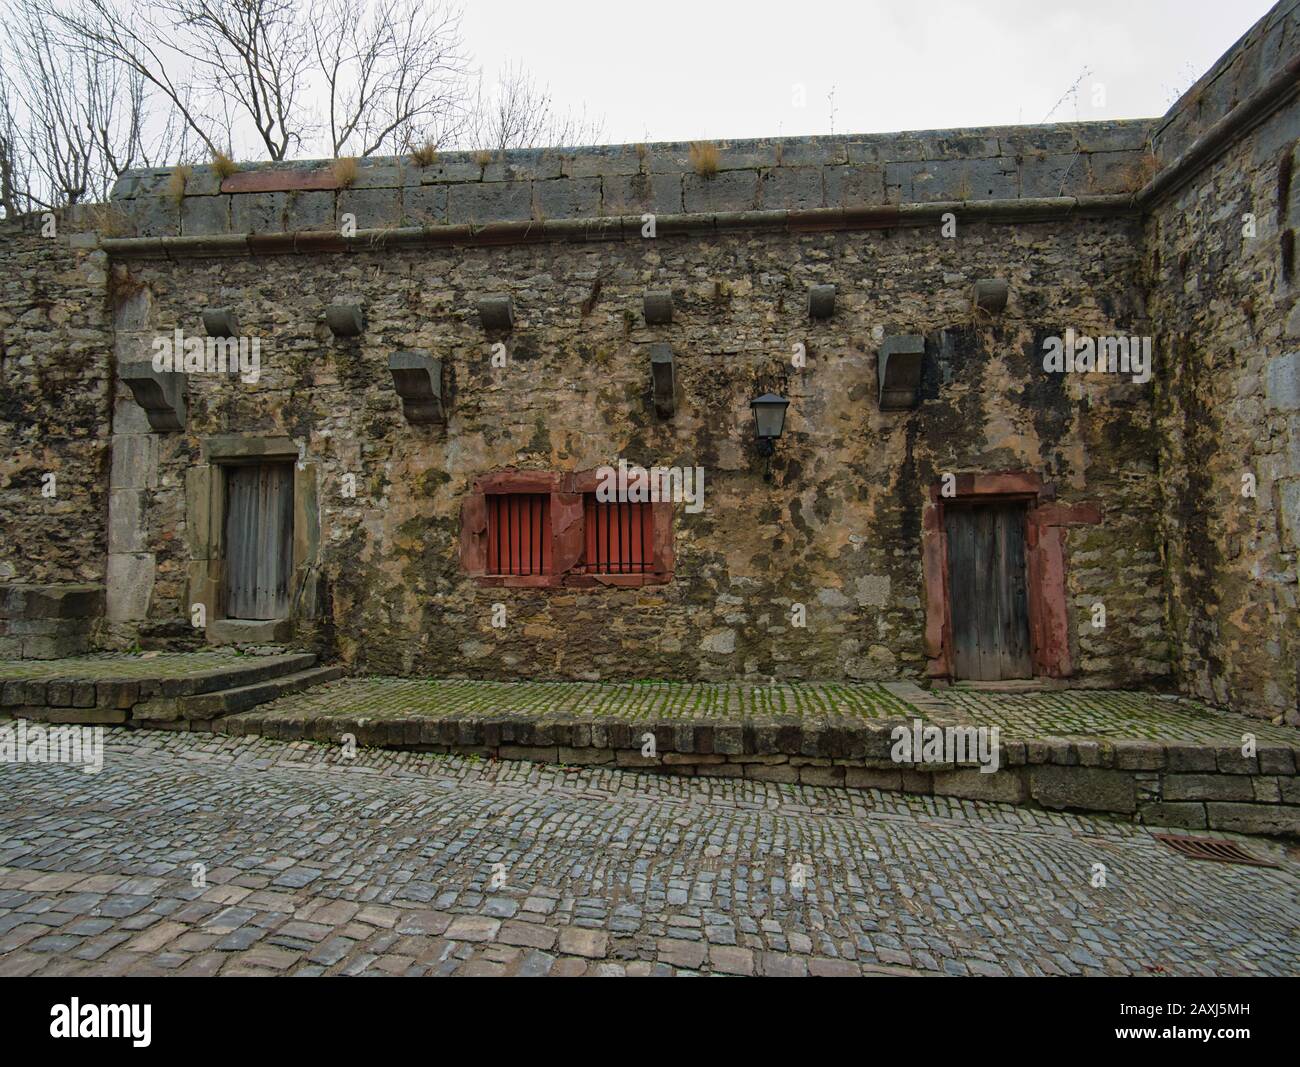 An old stone house with windows and doors integrated into a fortress wall Stock Photo